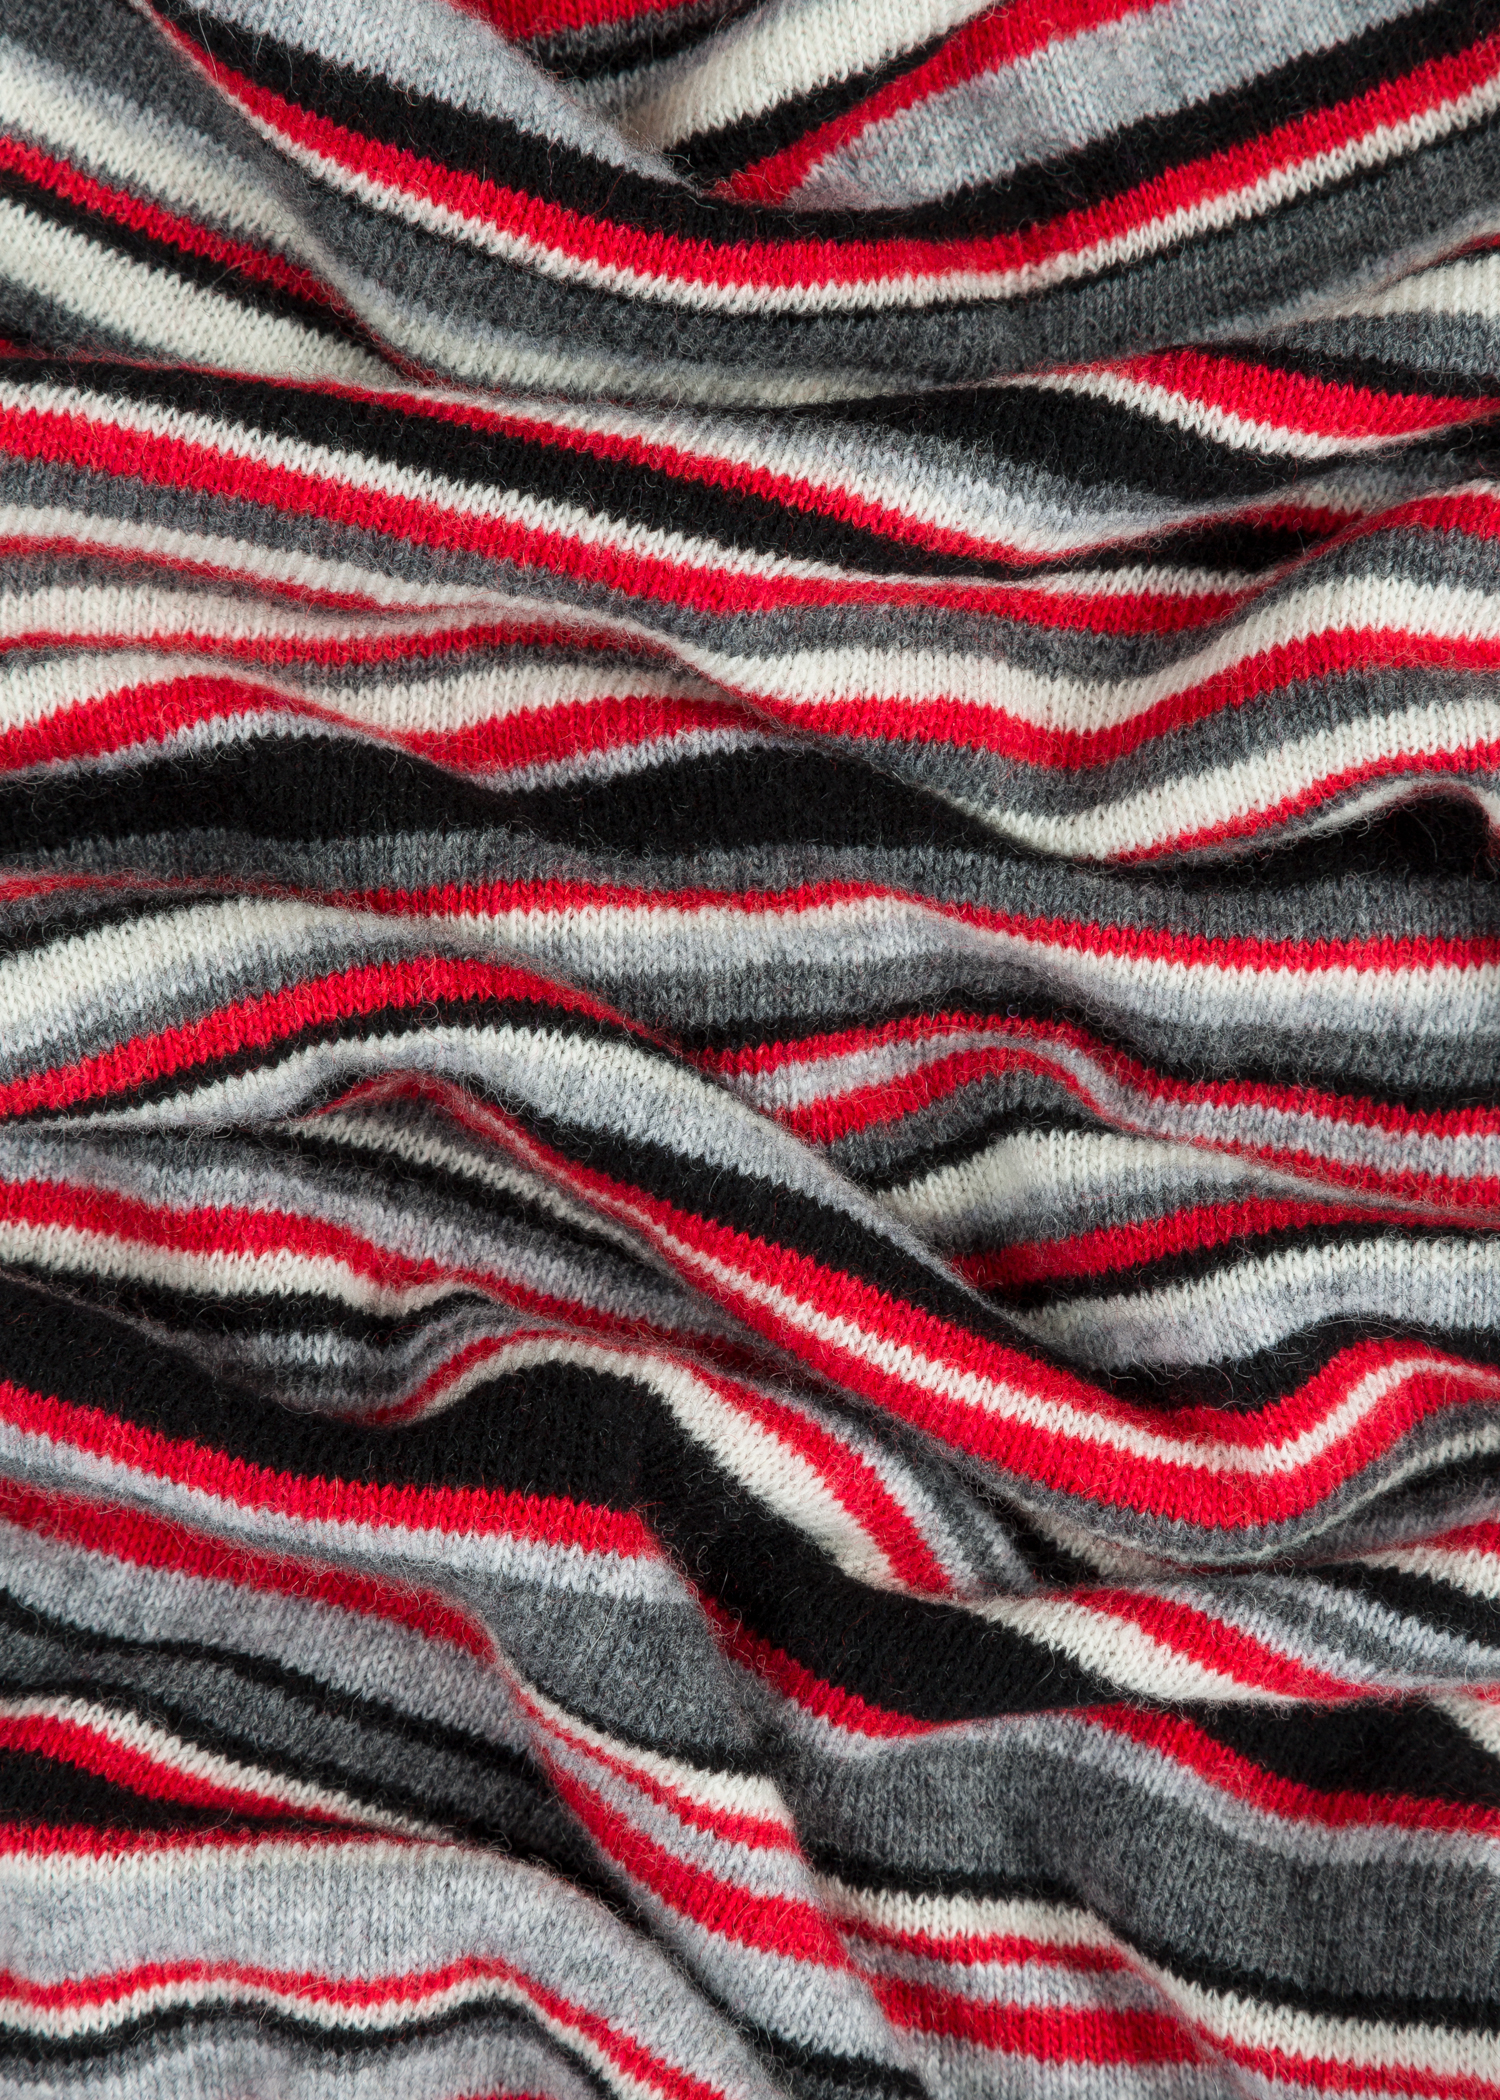 Creased view - Paul Smith X Manchester United – Red Striped Wool/Cashmere Scarf Paul Smith